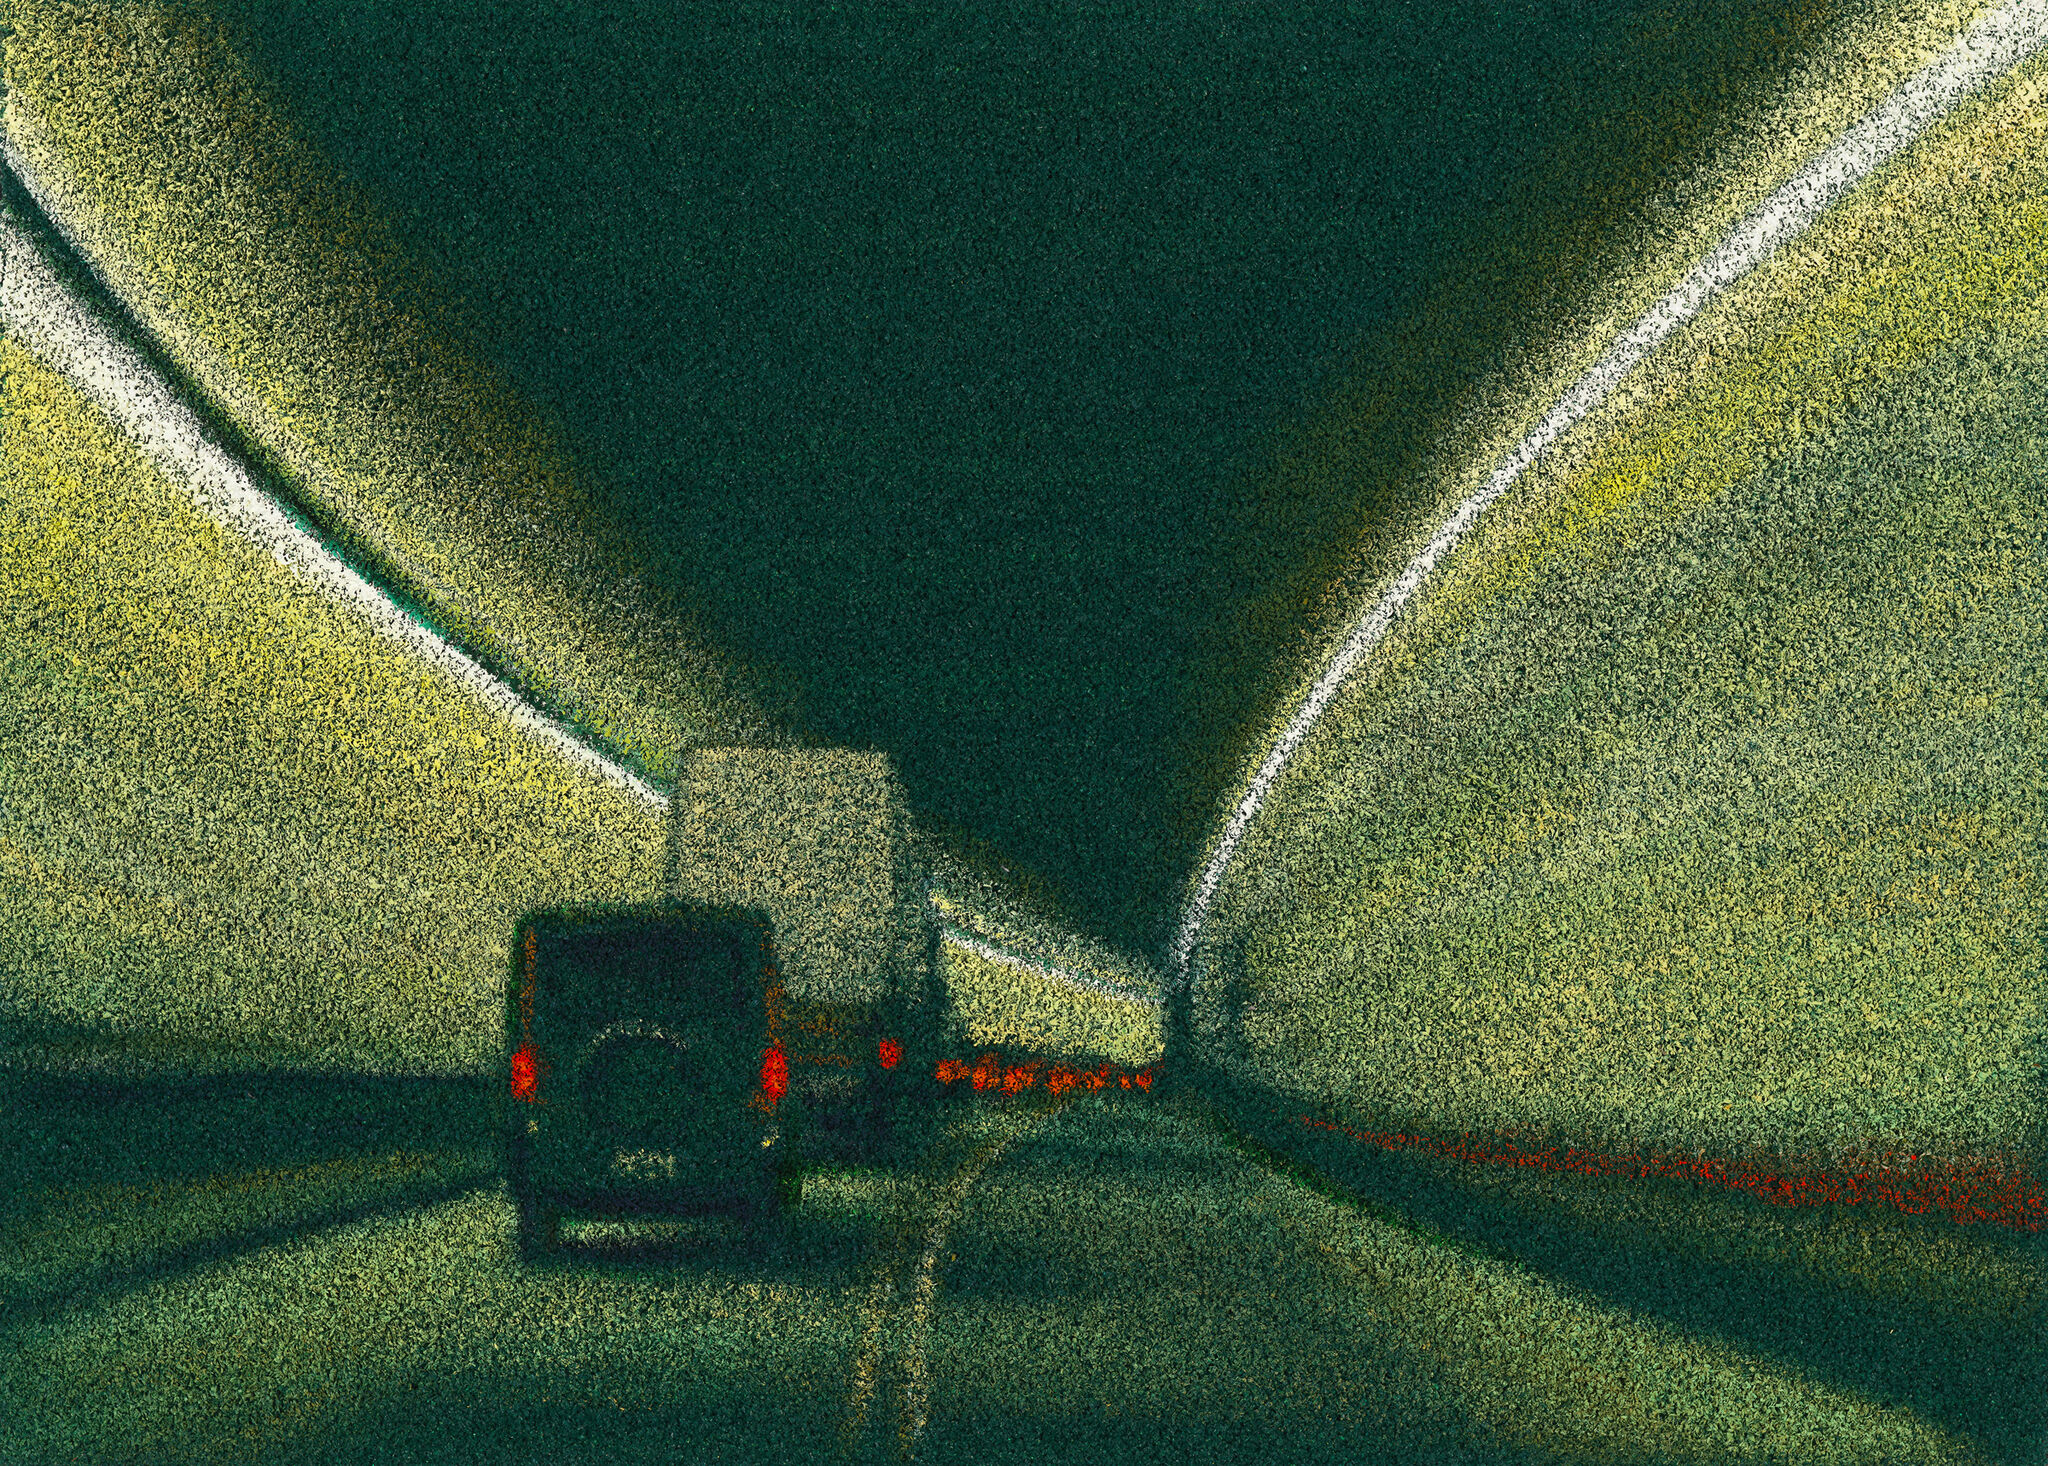 Vehicles driving through a dimly lit tunnel with blurred lights creating a sense of motion.